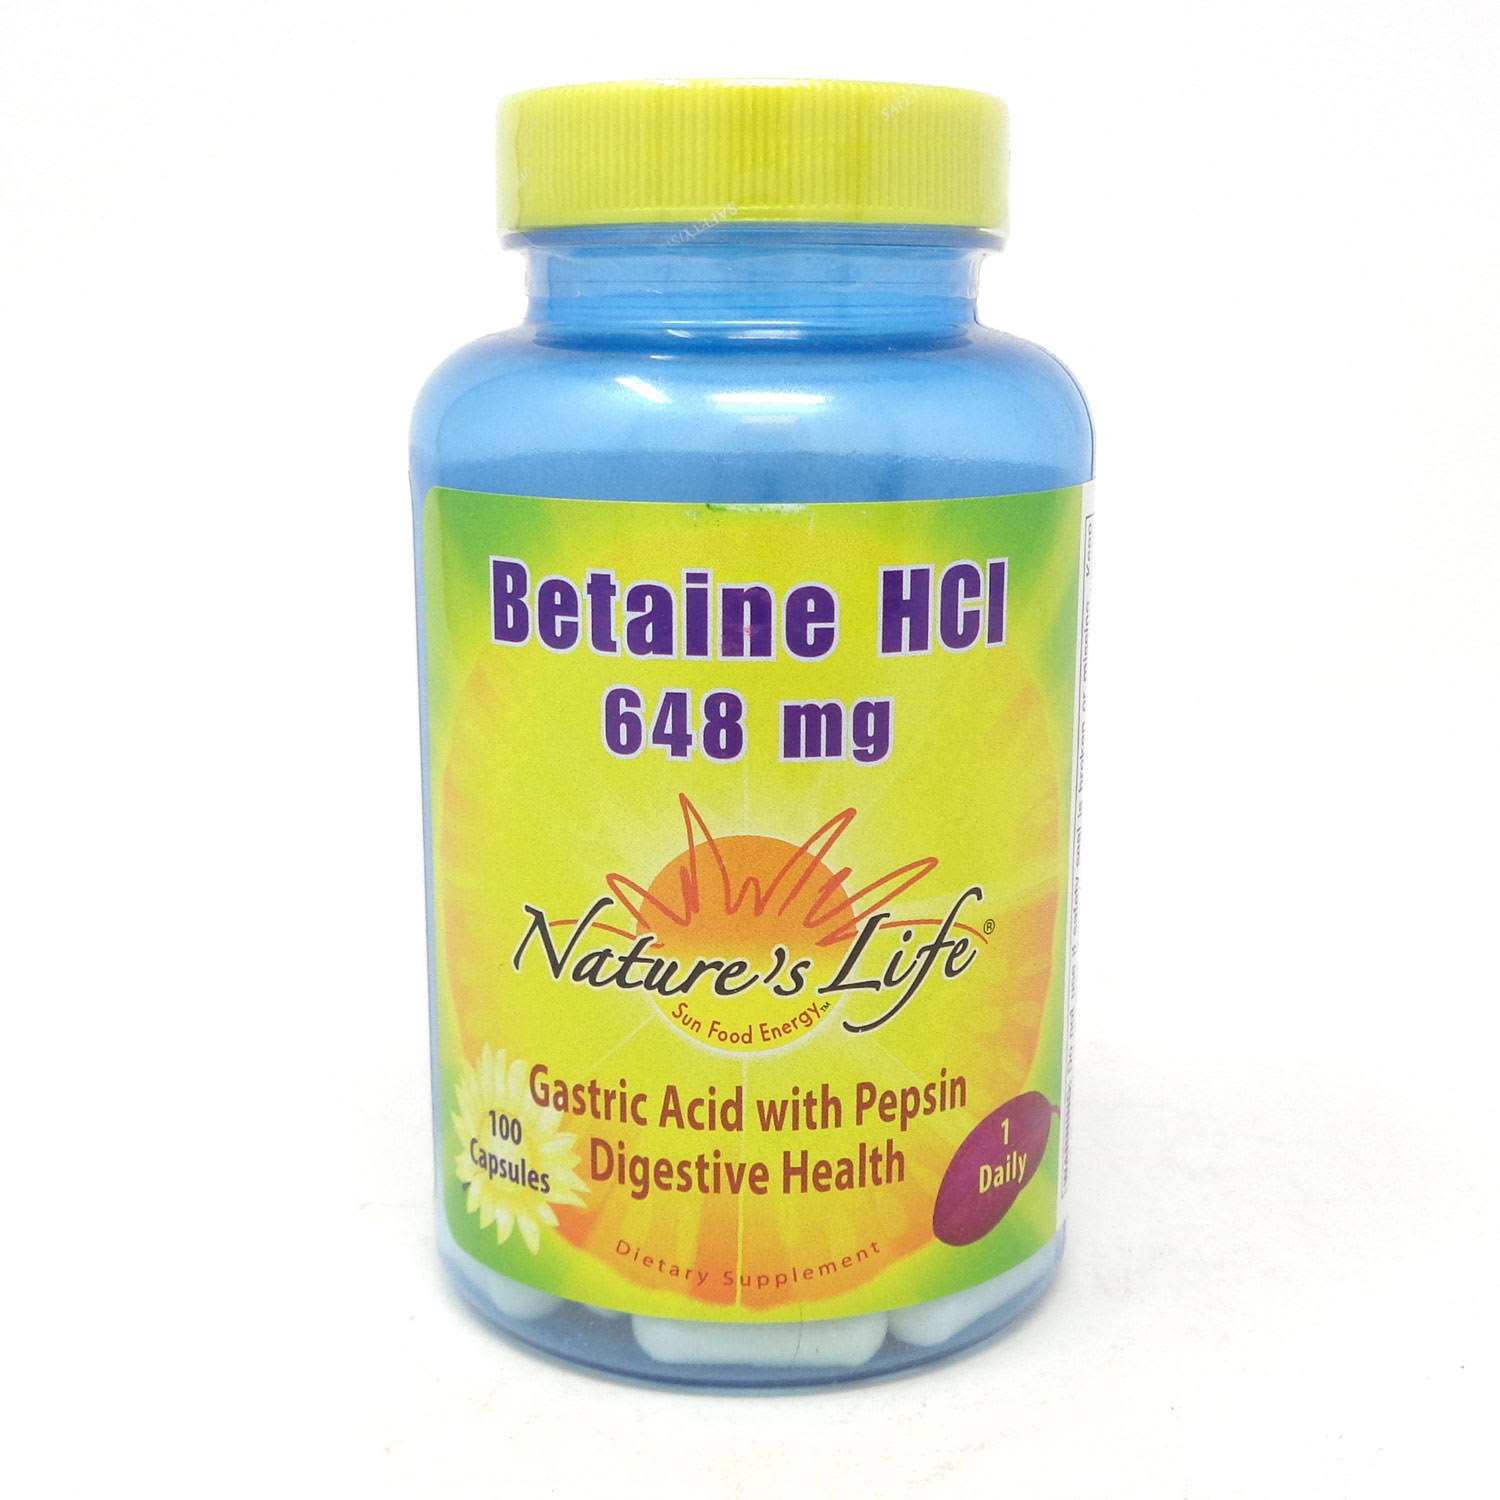 Nature's Life Betaine Hcl Vitamin Capsules - 100ct